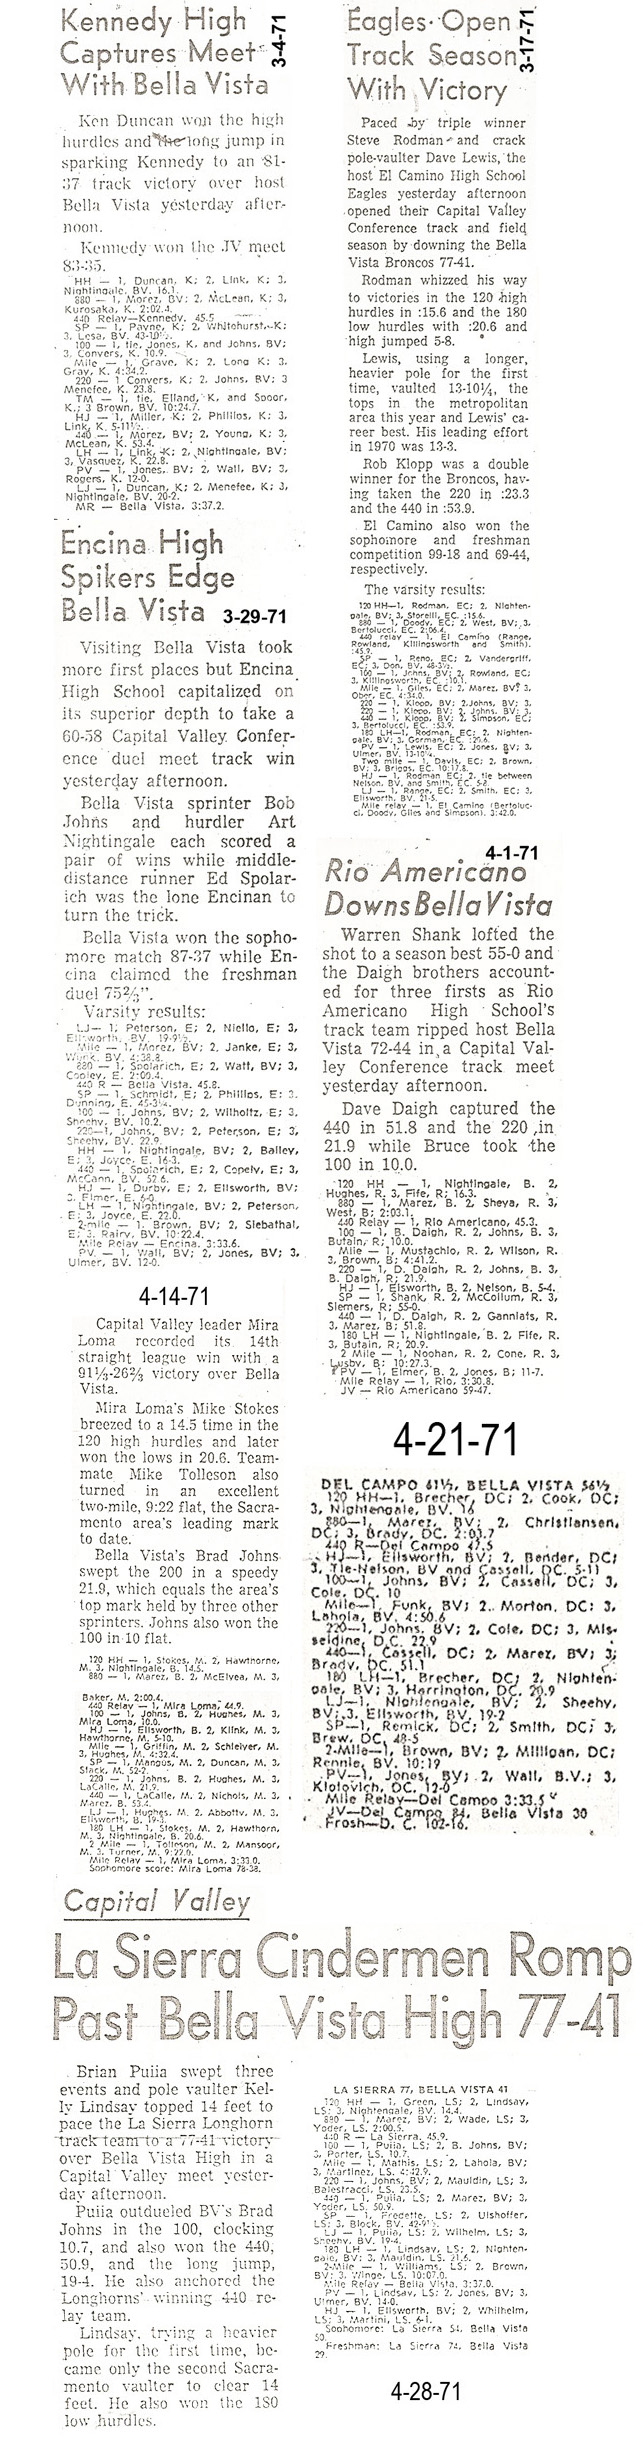 1971 BV Track Dual Results